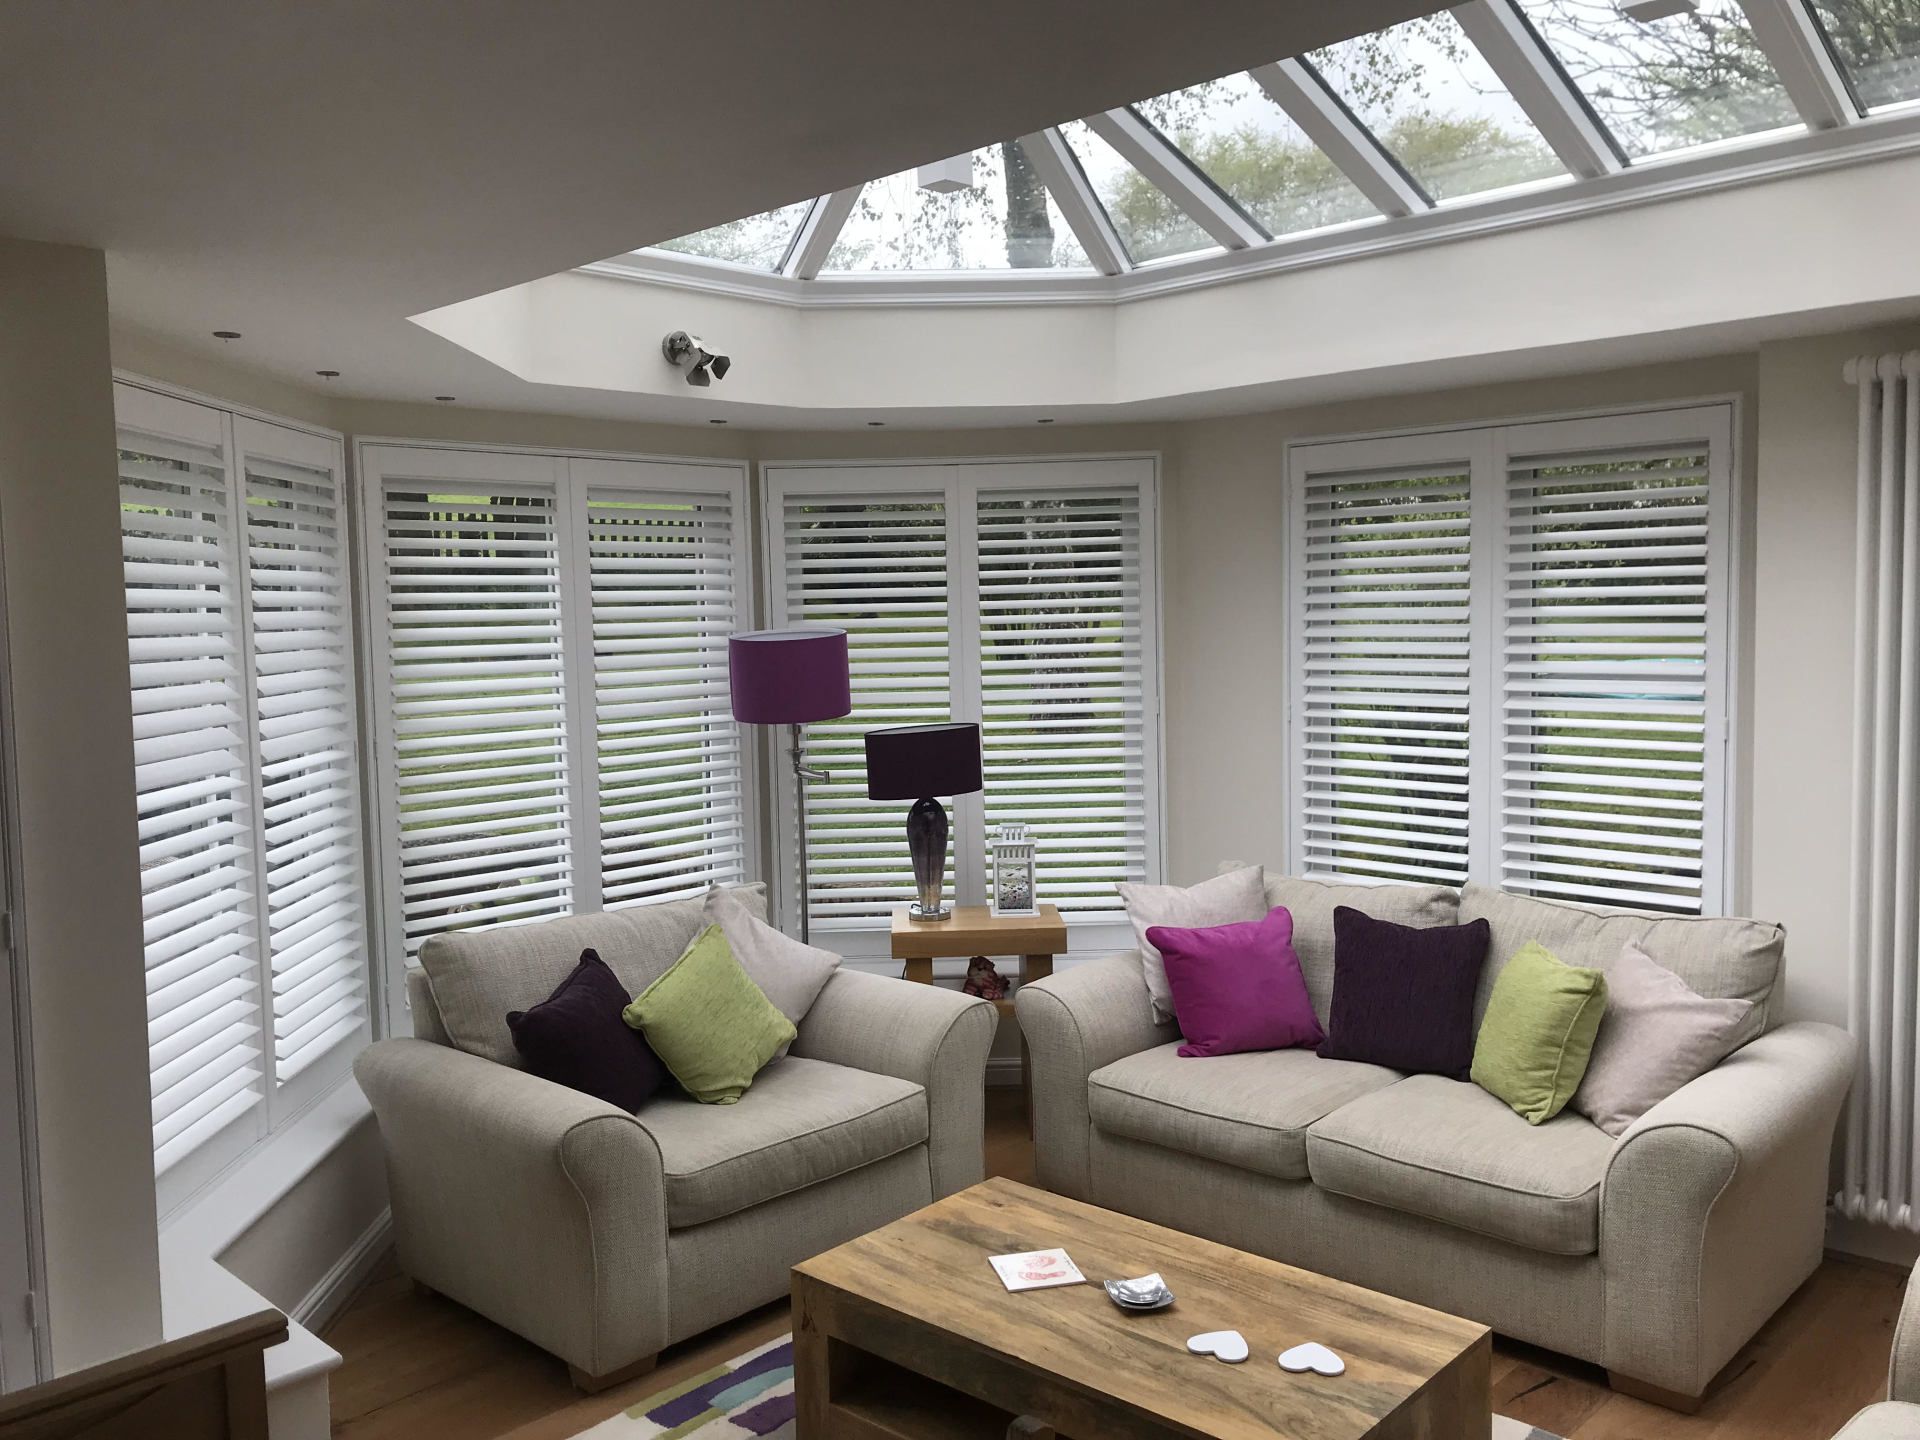 British Made Shutters available to purchase in Walton-on-Thames | Wooden Shutters | Patio Door Shutters |  Made-to-Measure Shutters